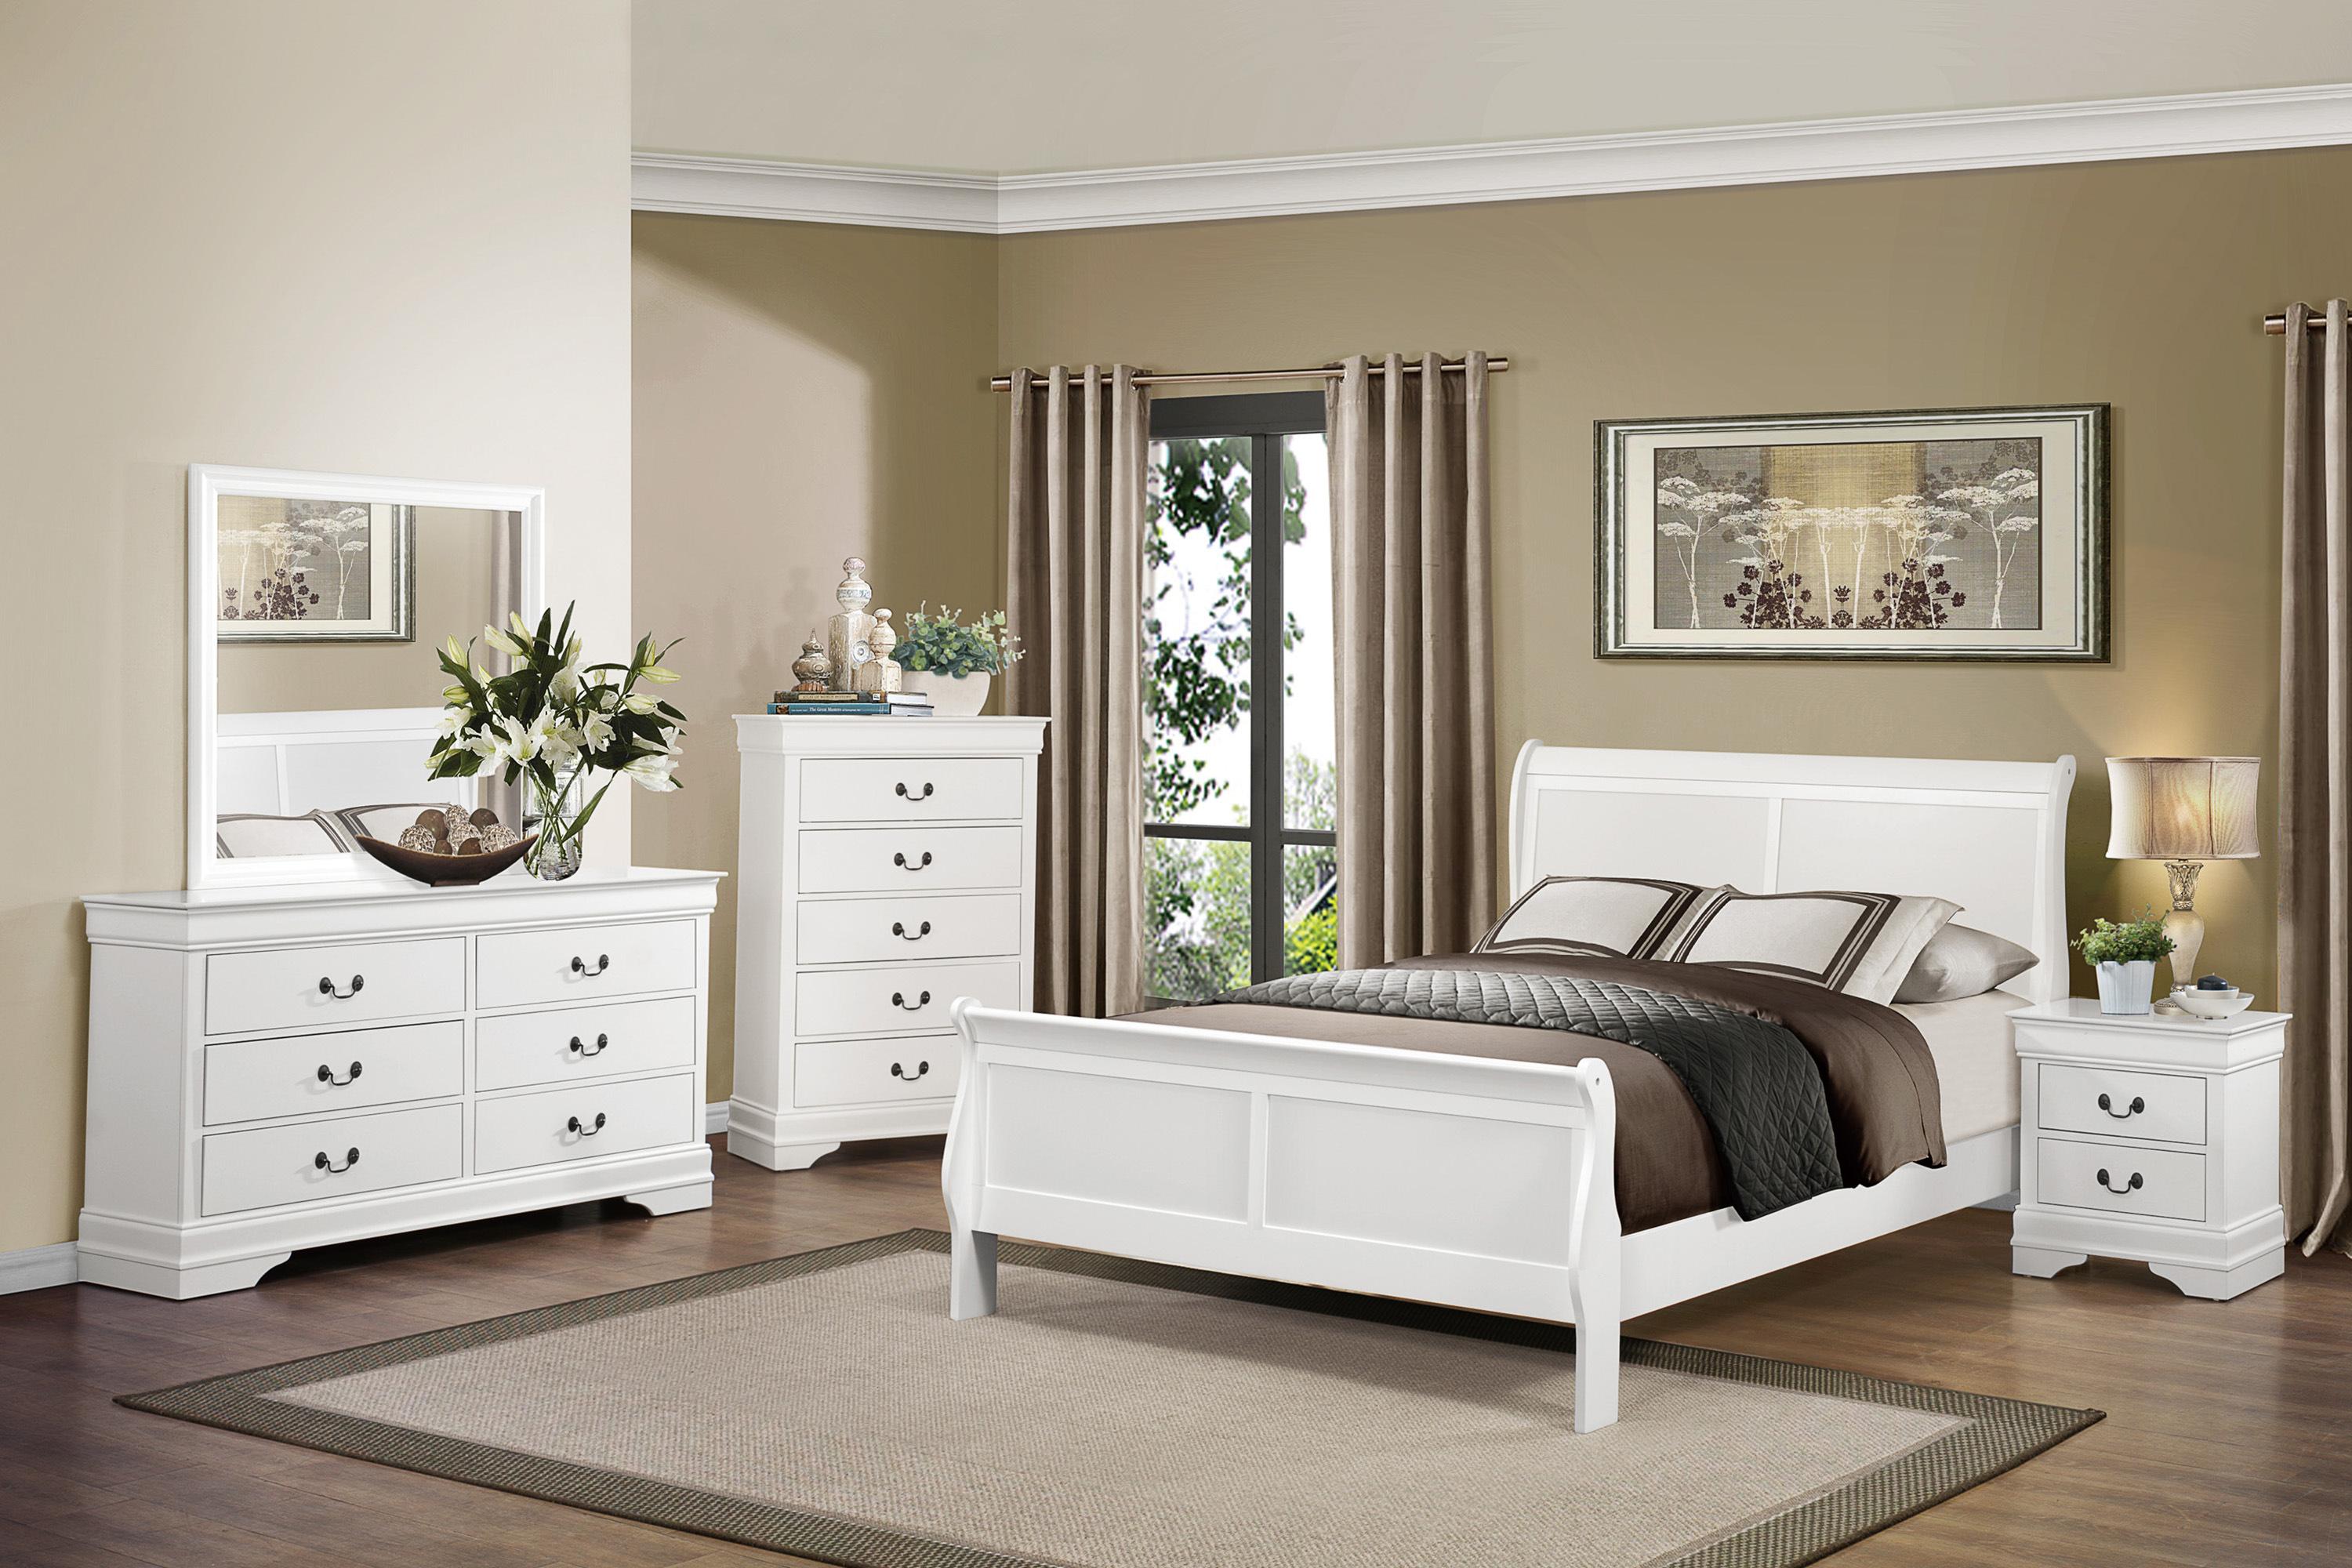 Traditional Bedroom Set 2147KW-1CK-6PC Mayville 2147KW-1CK-6PC in White 